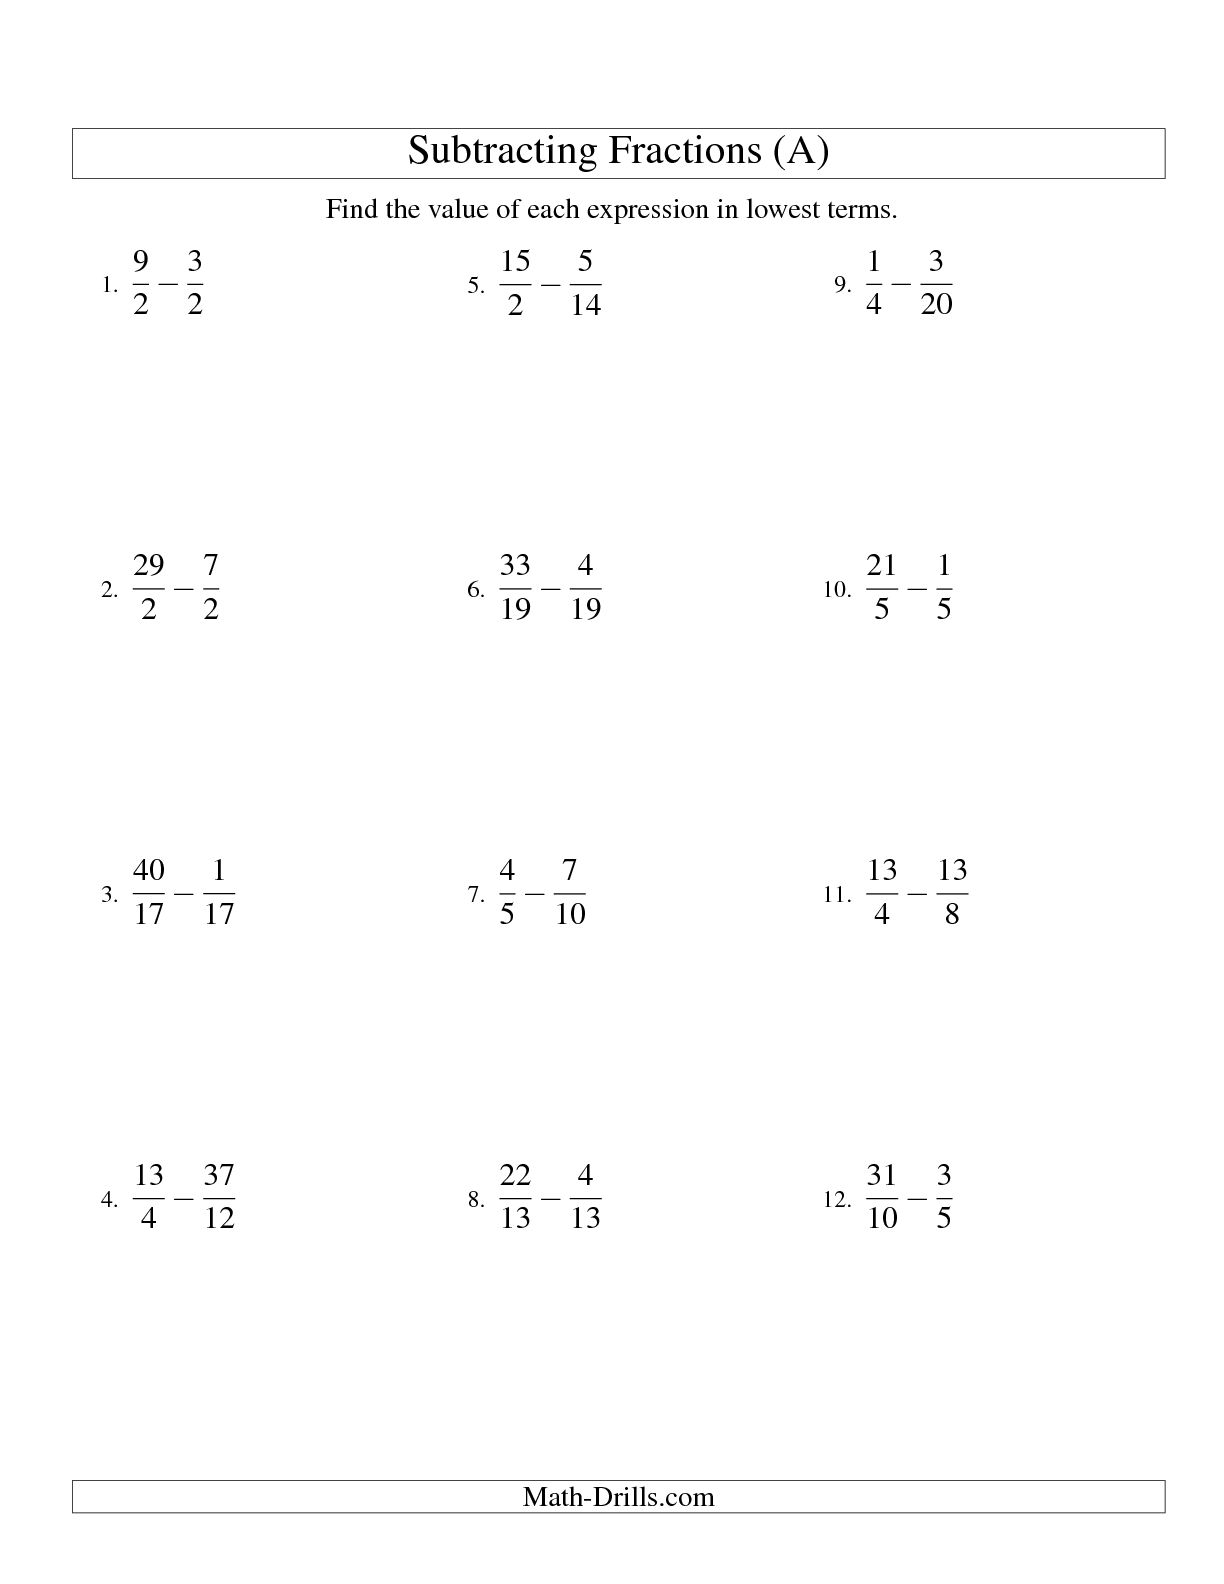 12 Best Images of Mixed Numbers Improper Fractions Worksheets Answers